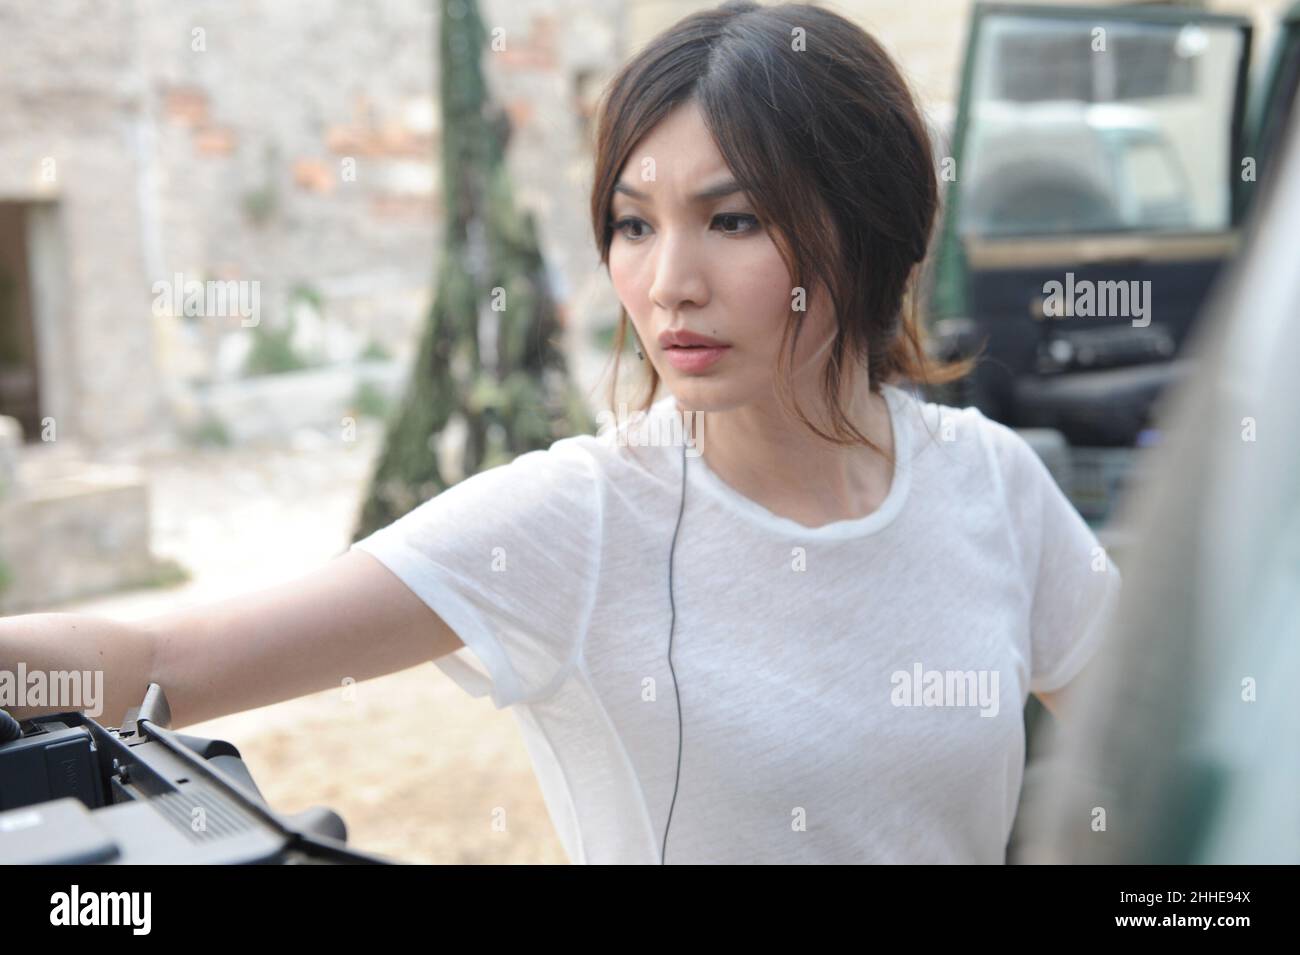 GEMMA CHAN in STRATTON (2017), directed by SIMON WEST. Credit: GFM films / Album Stock Photo